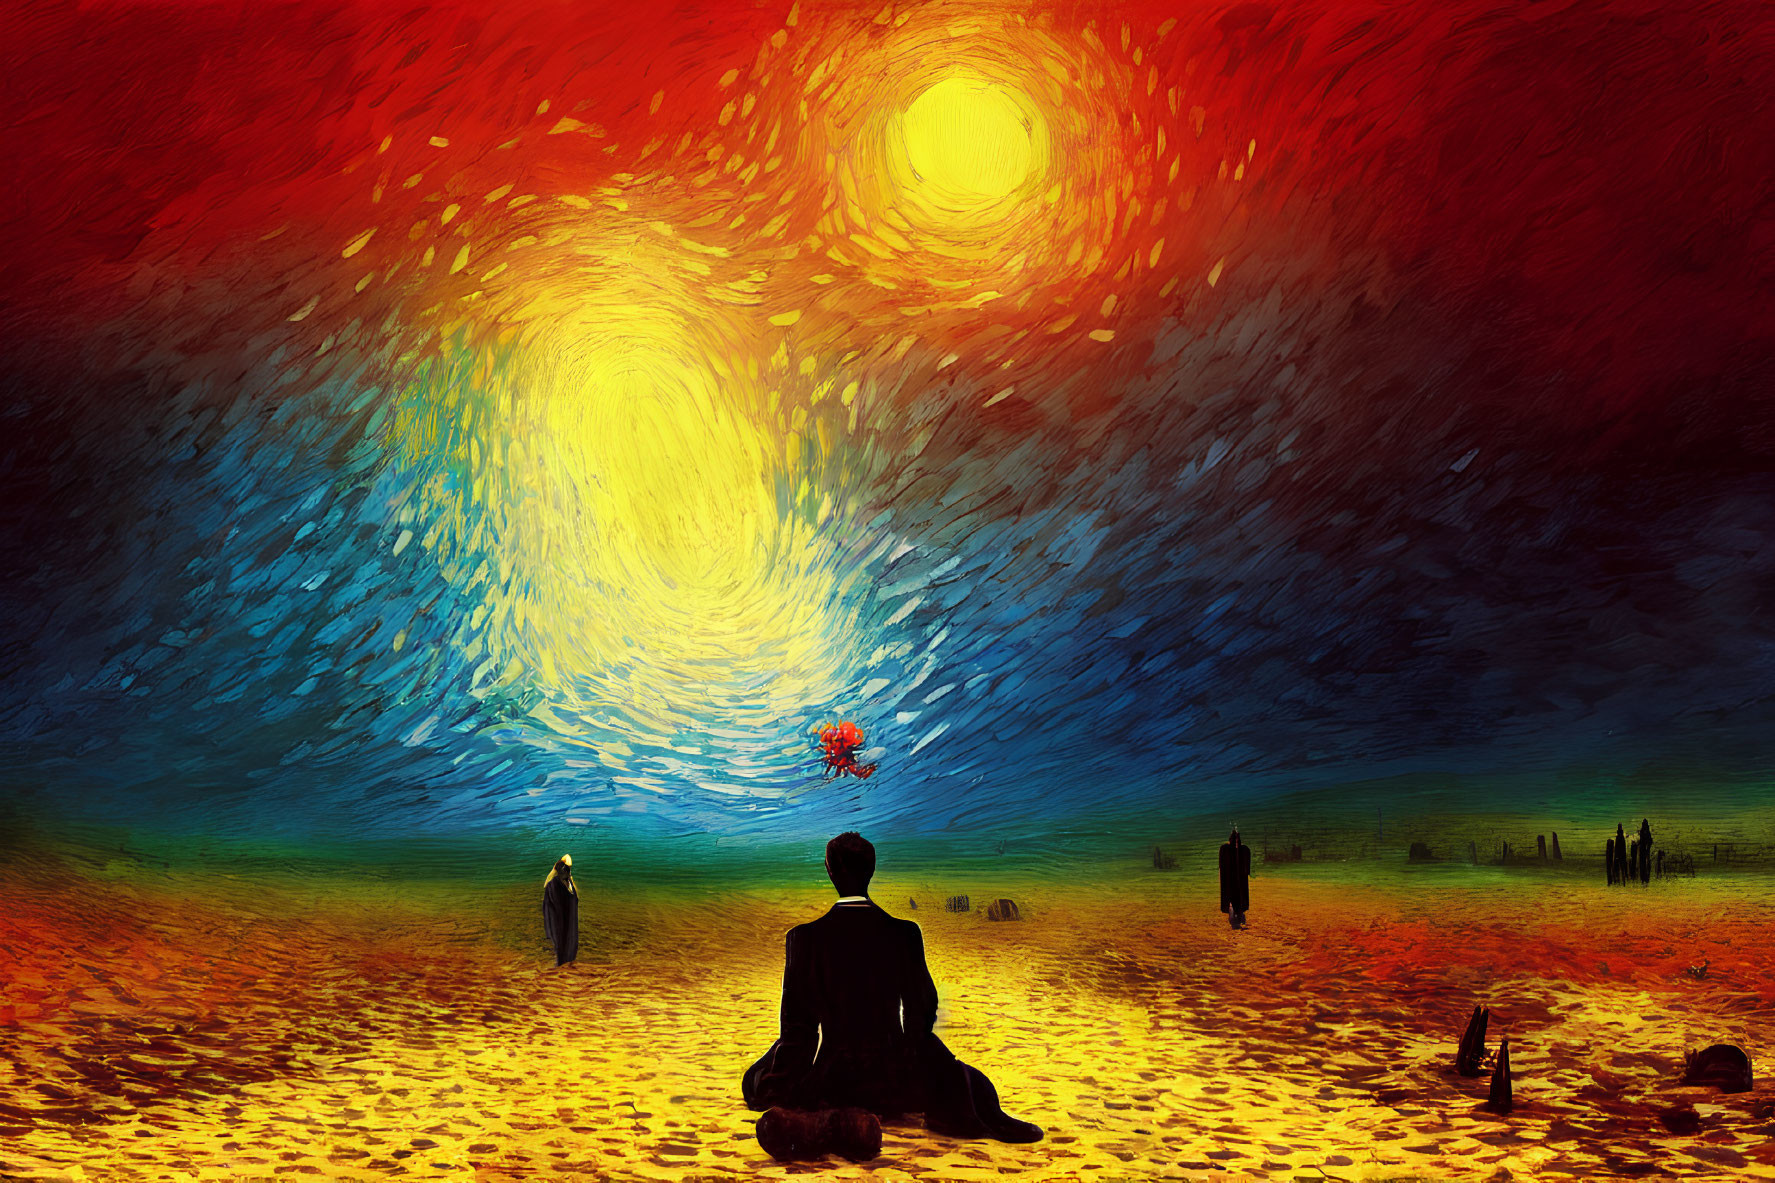 Impressionistic painting of person on sandy ground with figures and psychedelic sky